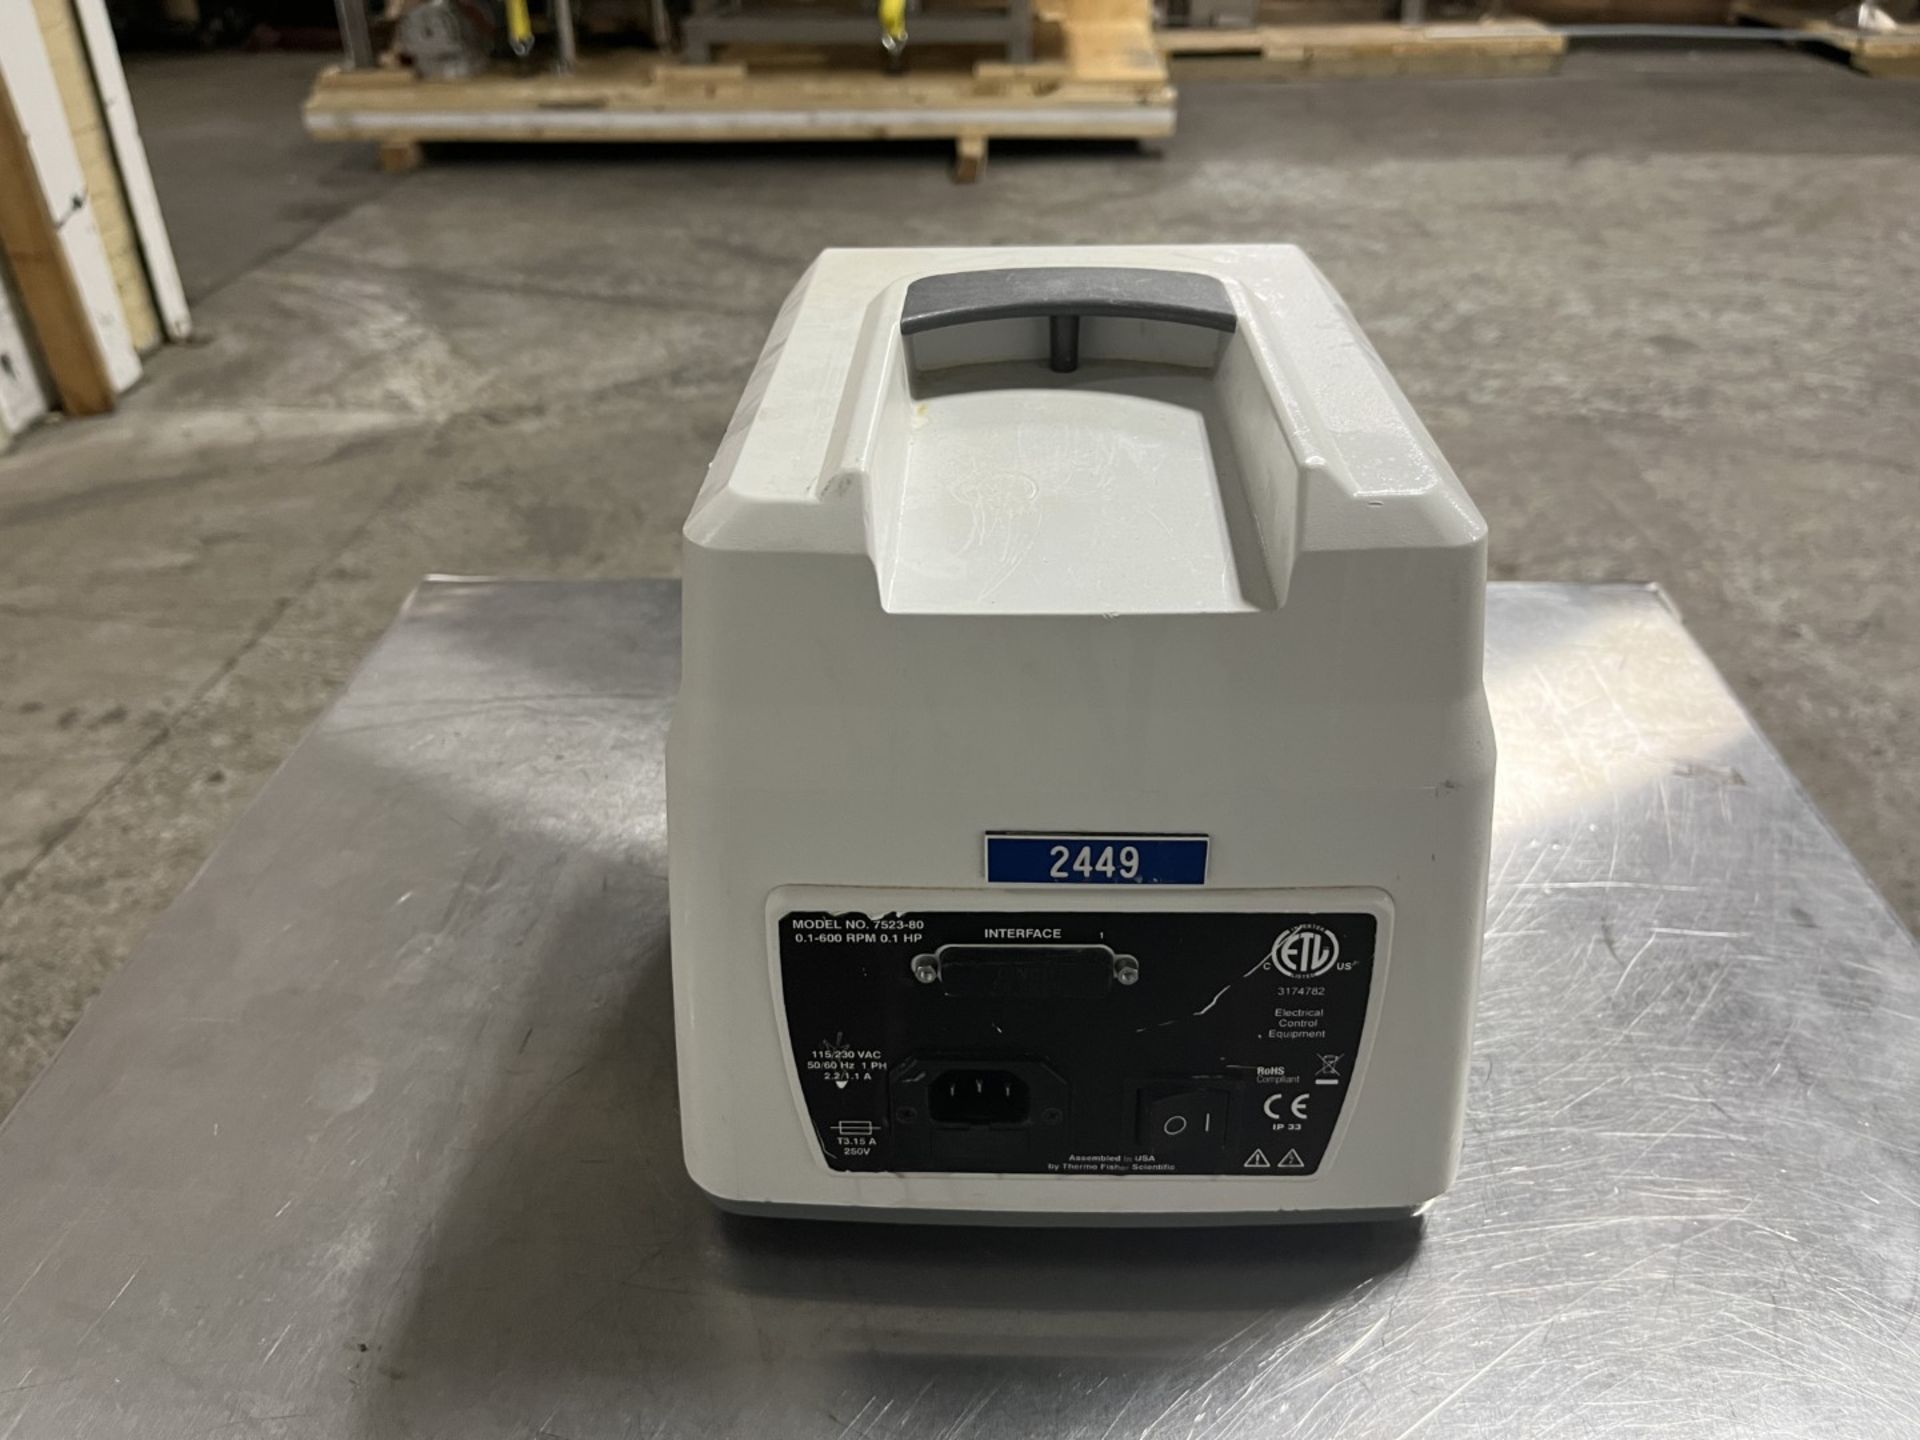 Cole-Parmer masterflex L/S pump, model 7523-80. (TAG # 1190201) Ships from Cleveland, OH - Image 4 of 6